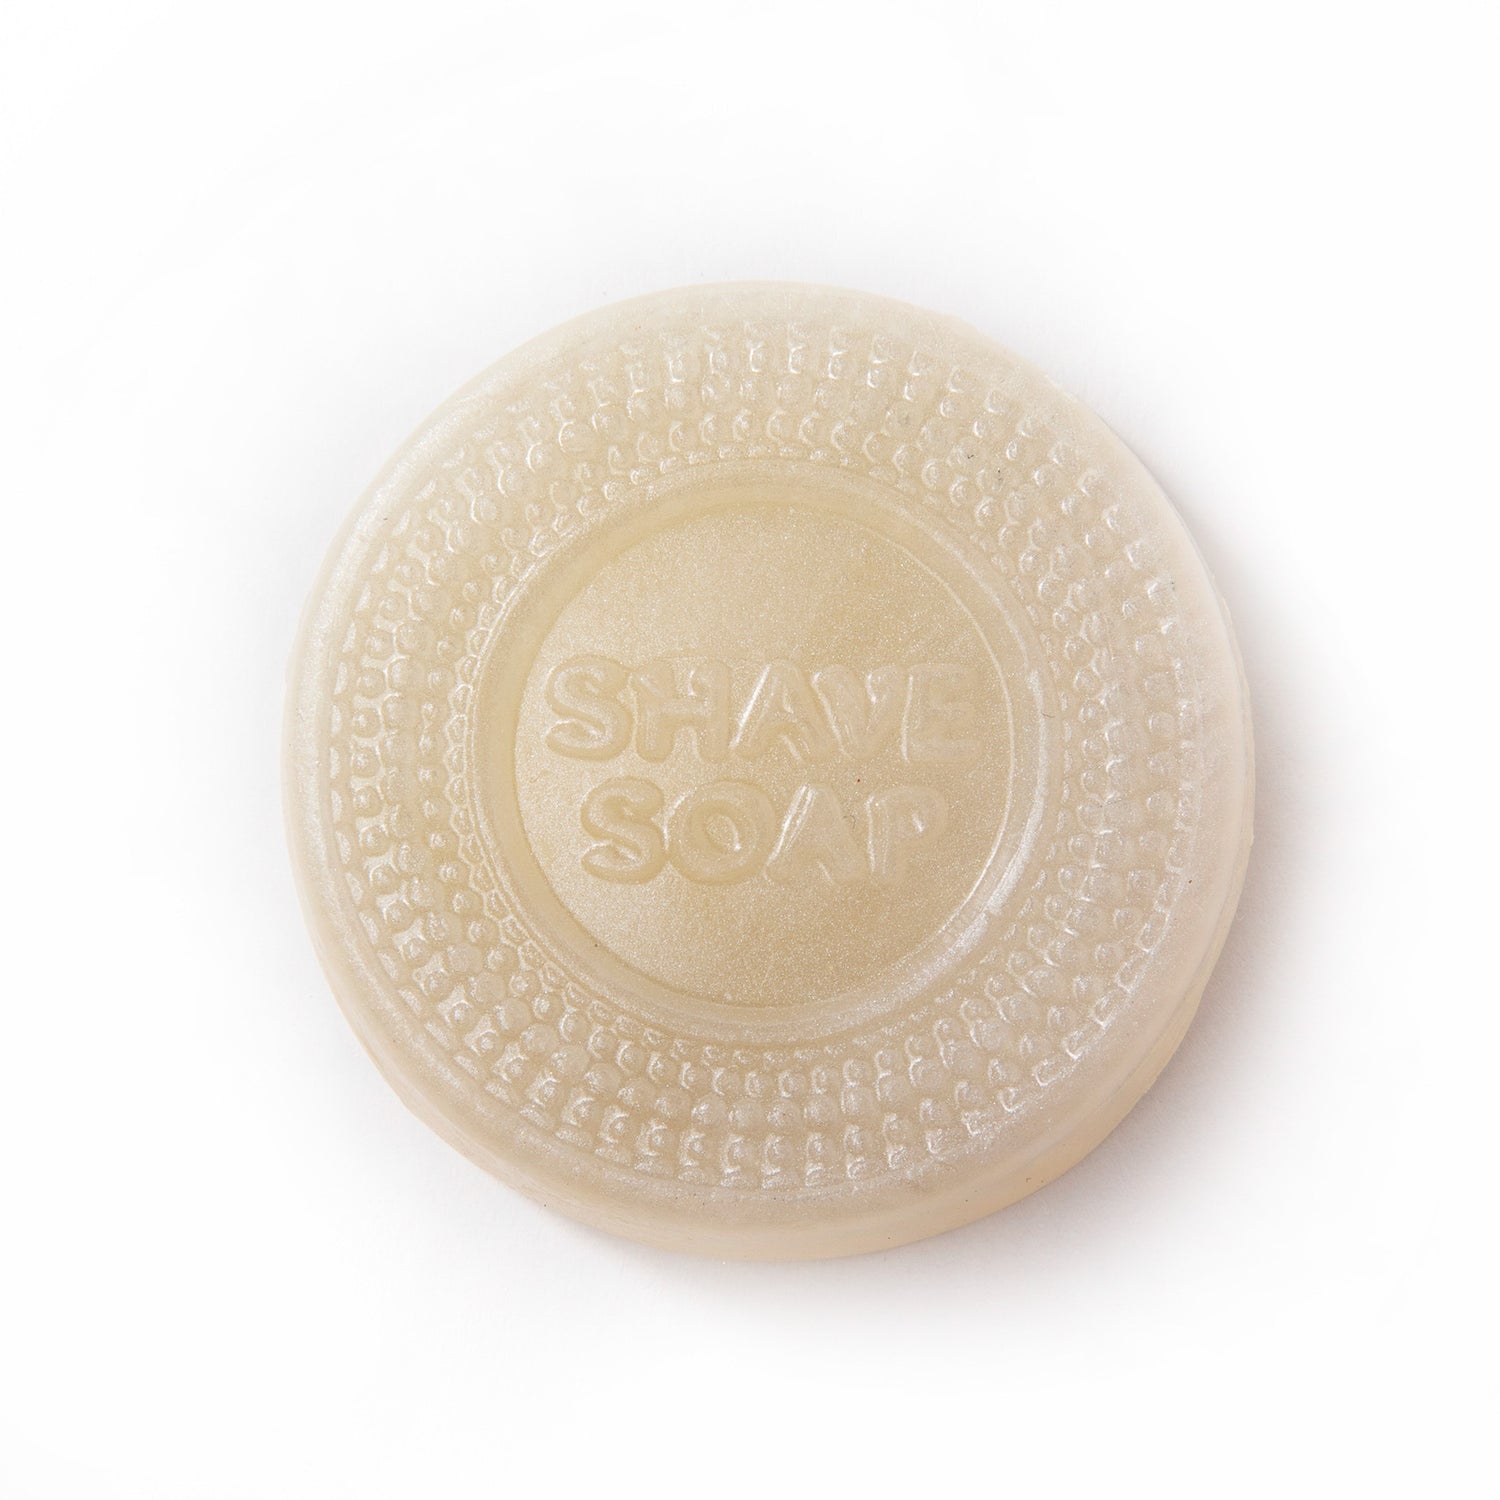 Beverly Hills Shave Soap